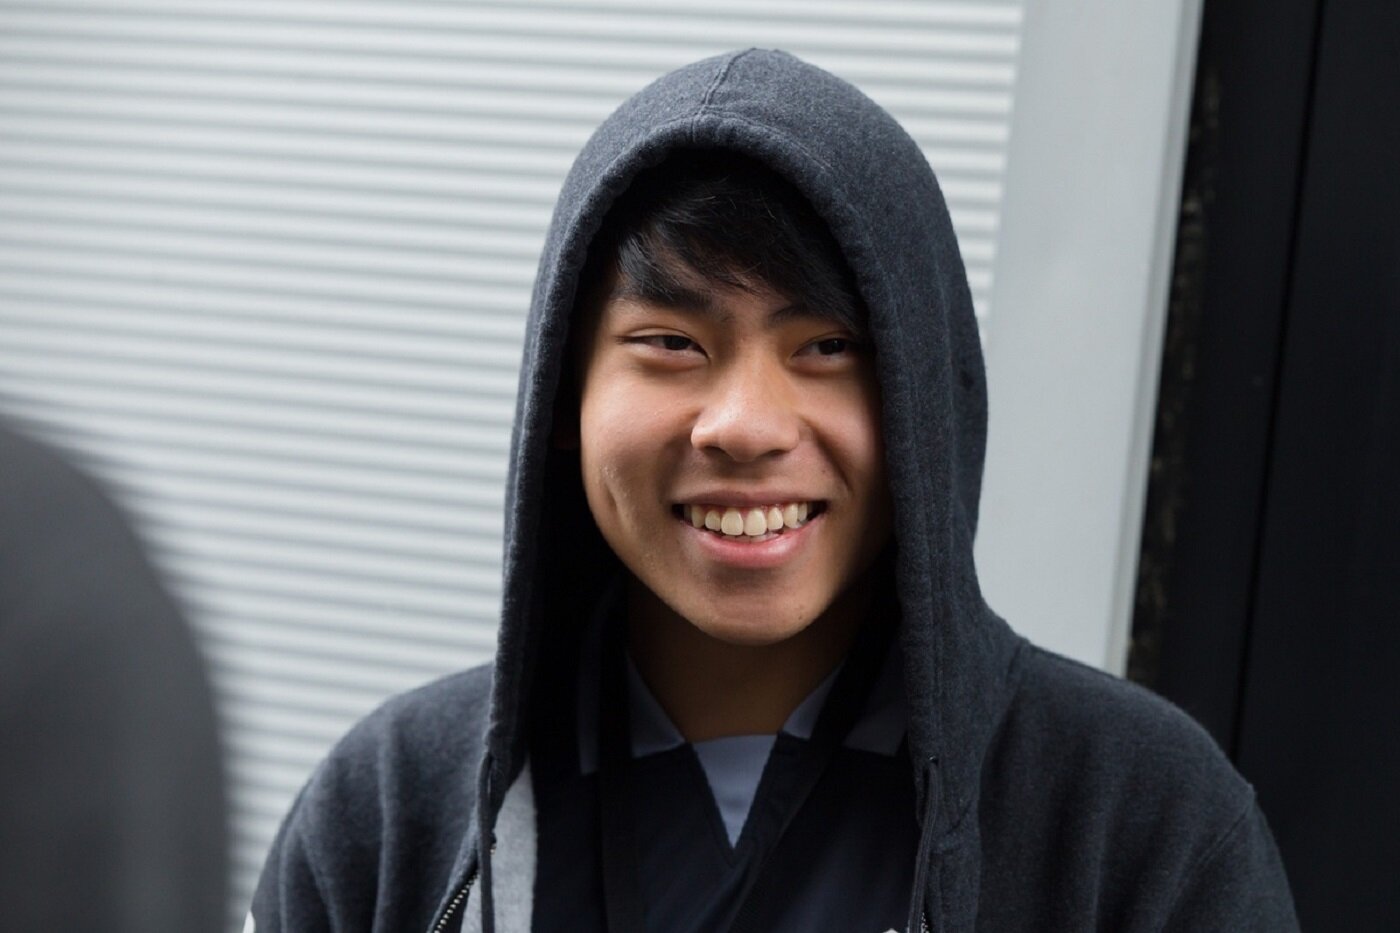 OG picked up a surprising 2-0 against rivals EG on TI9 day two. (Image via EPICENTER)